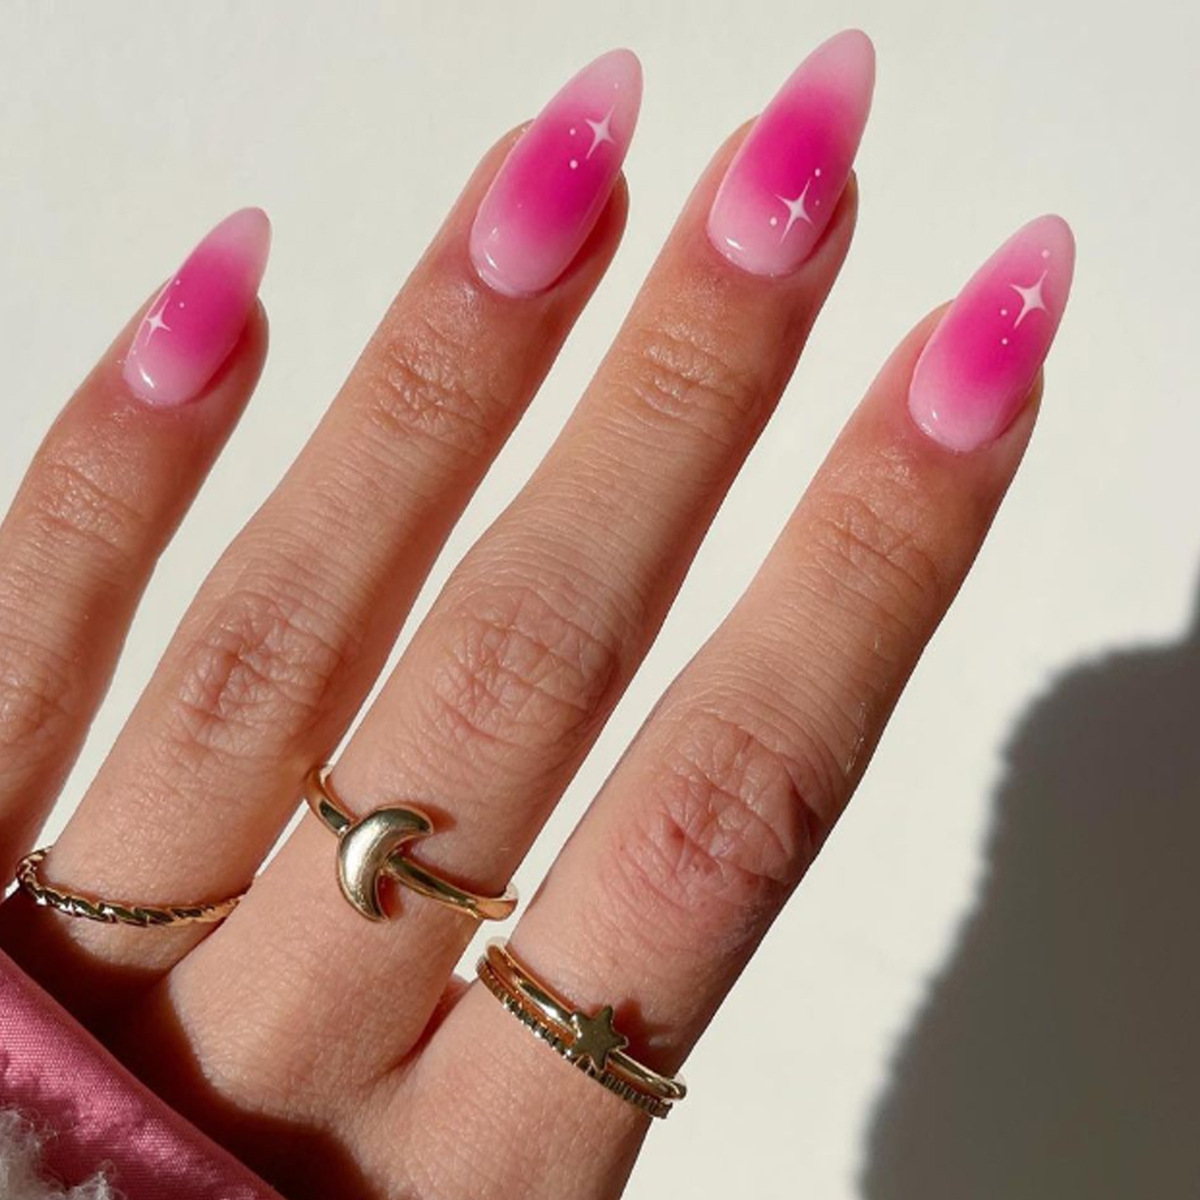 The Essential Guide to Lasting Nail Glamor